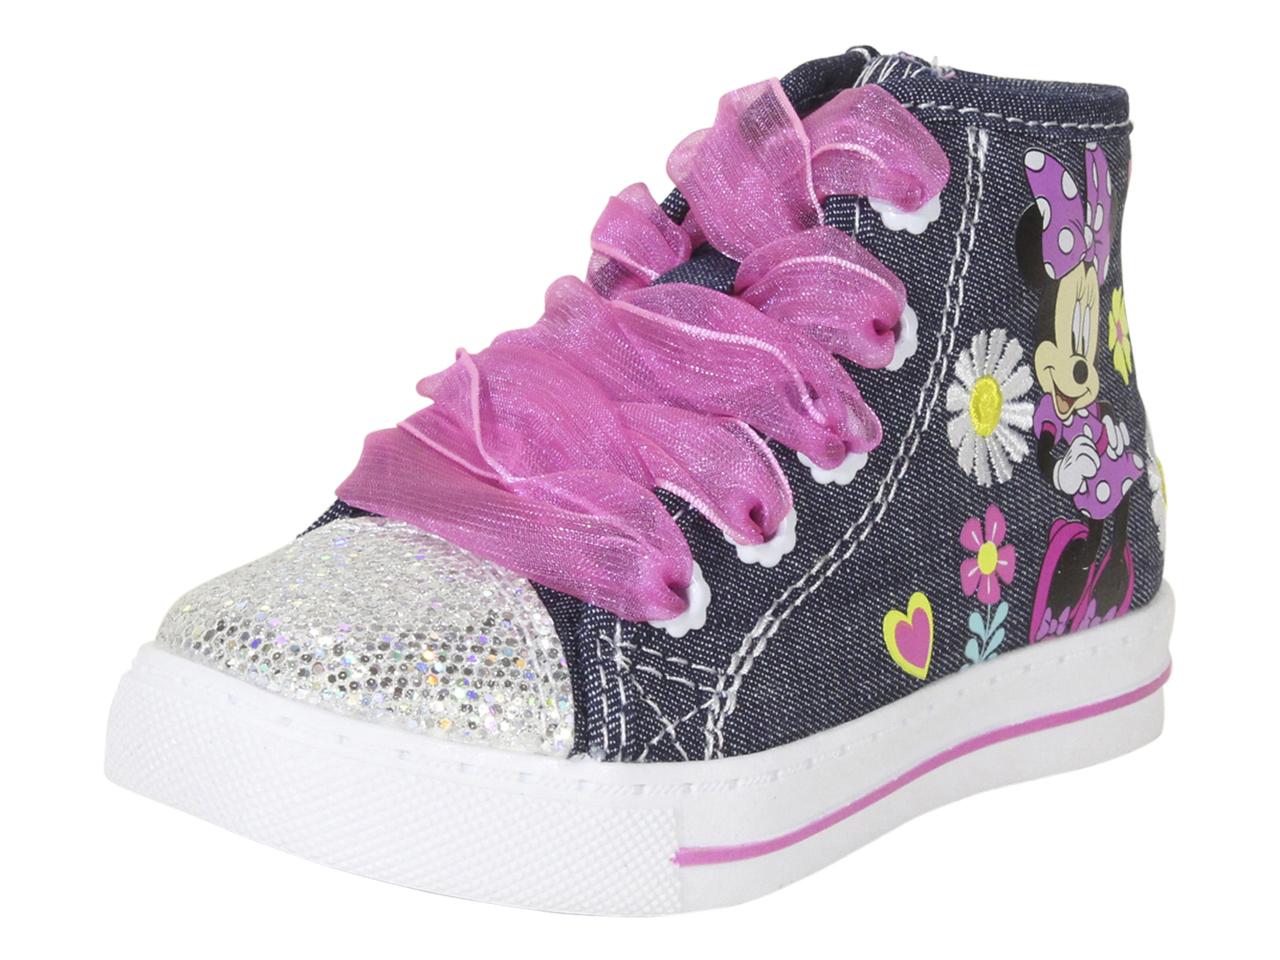 glitter high top sneakers for toddlers